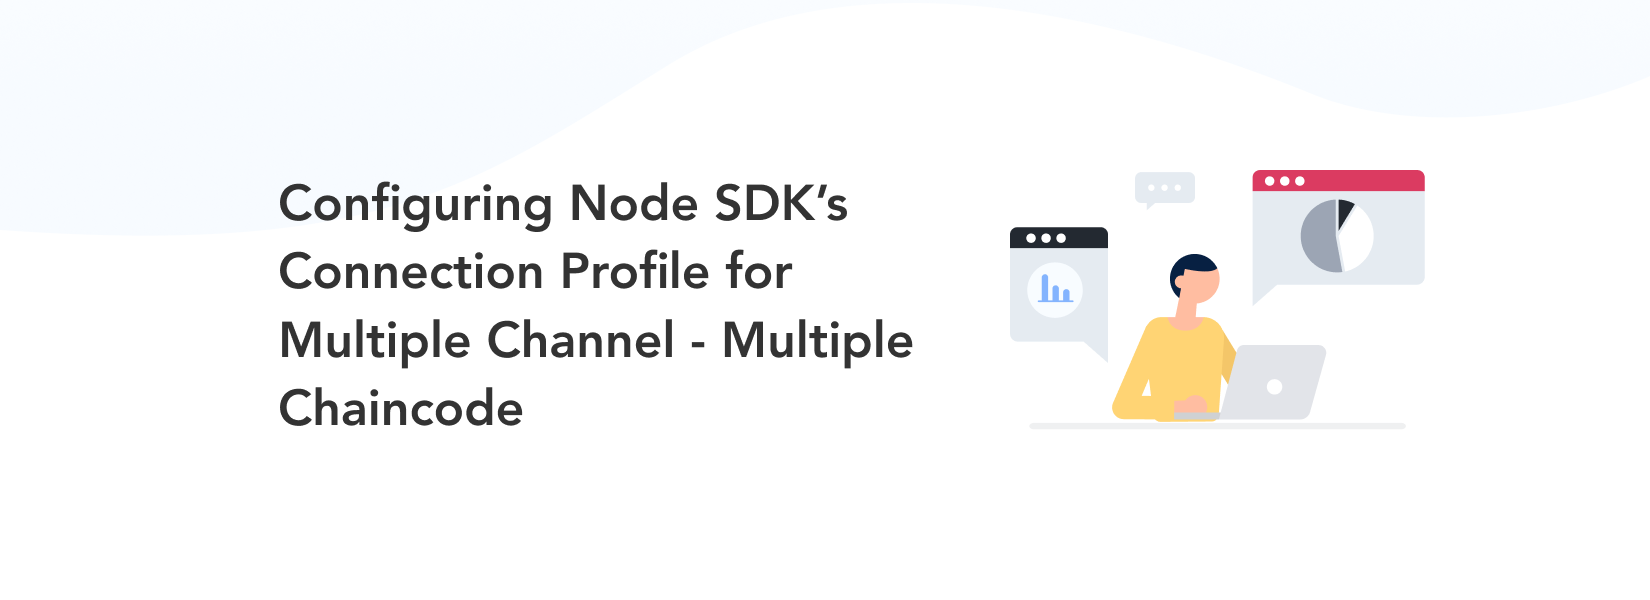 Configuring Node SDK's Connection Profile for Multiple Channel - Multiple Chaincode